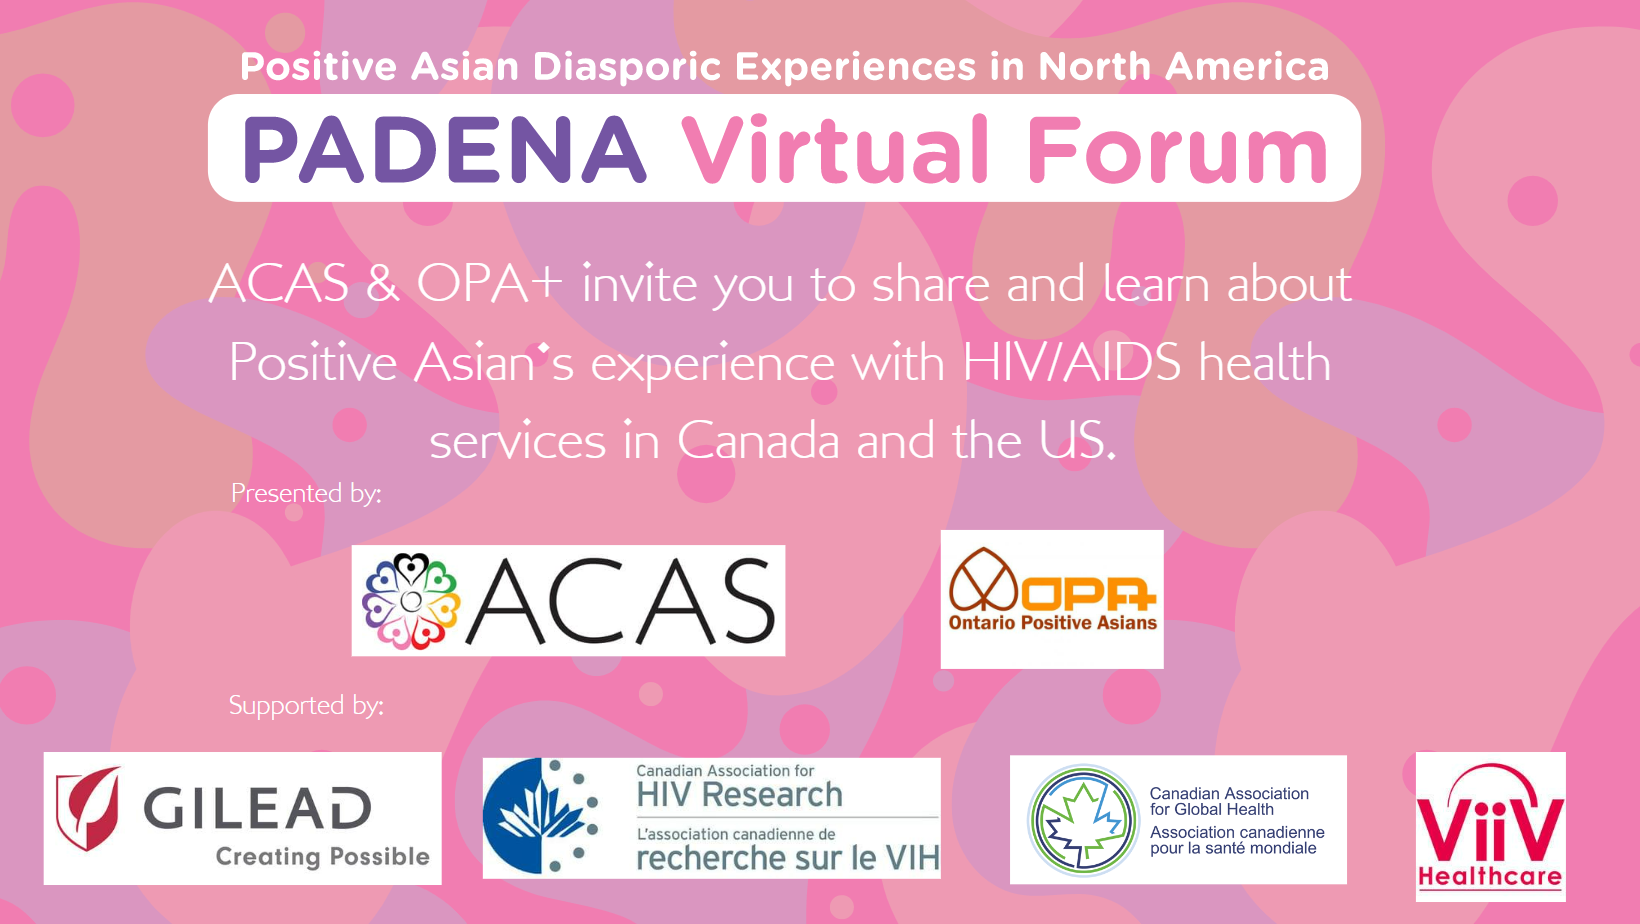 ACAS & OPA+ invite you to share and learn about Positive Asian's experience with HIV/AIDS health services in Canada and the US.